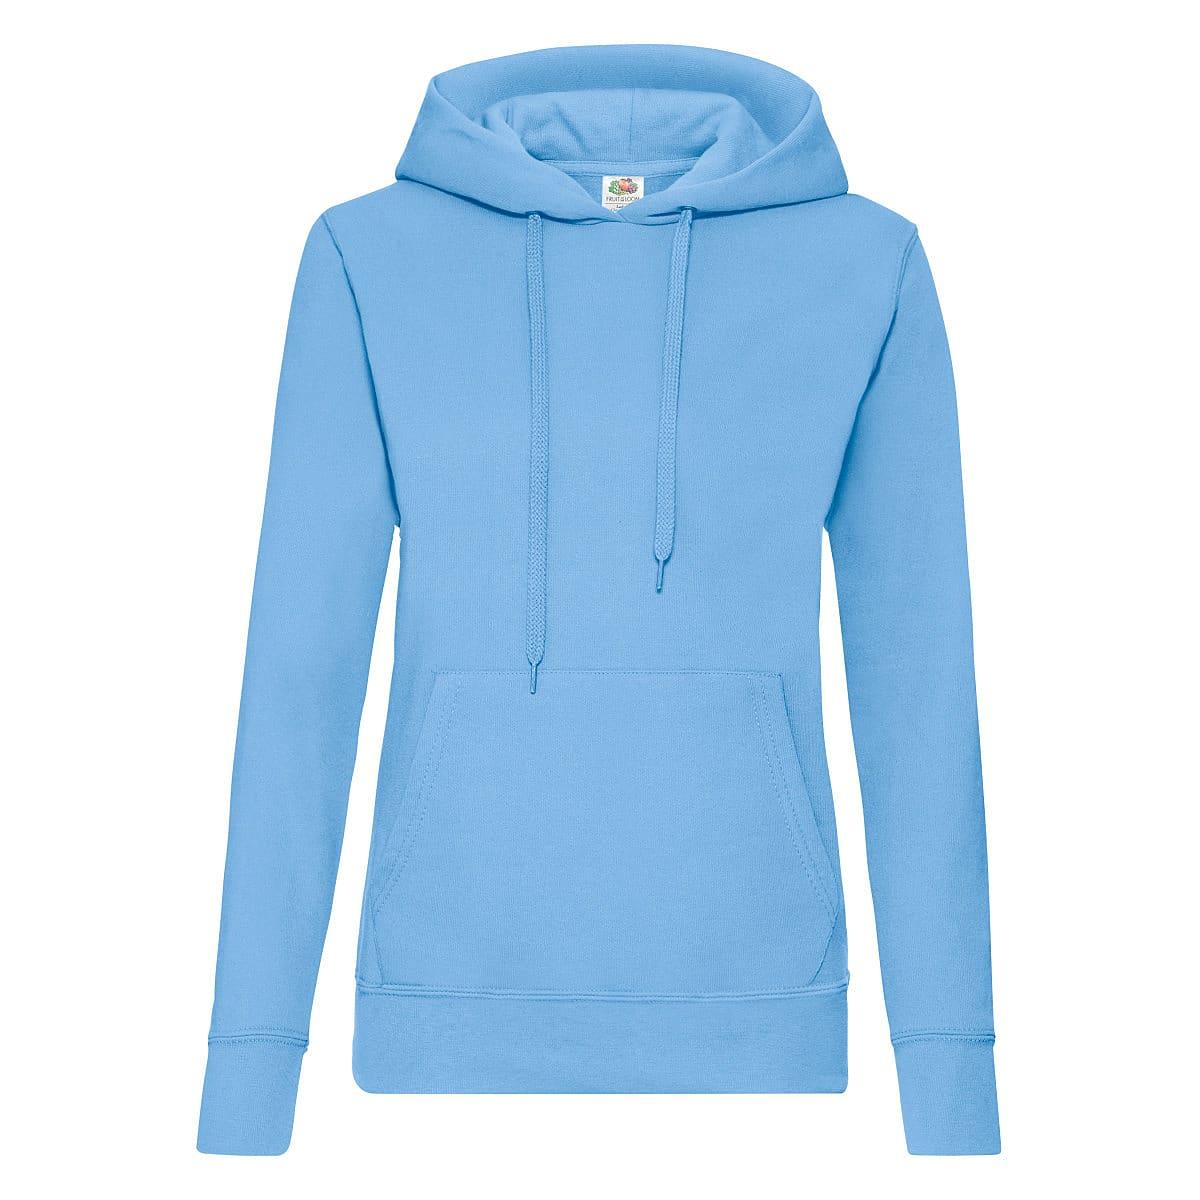 Fruit Of The Loom Lady-Fit Classic Hoodie in Sky Blue (Product Code: 62038)